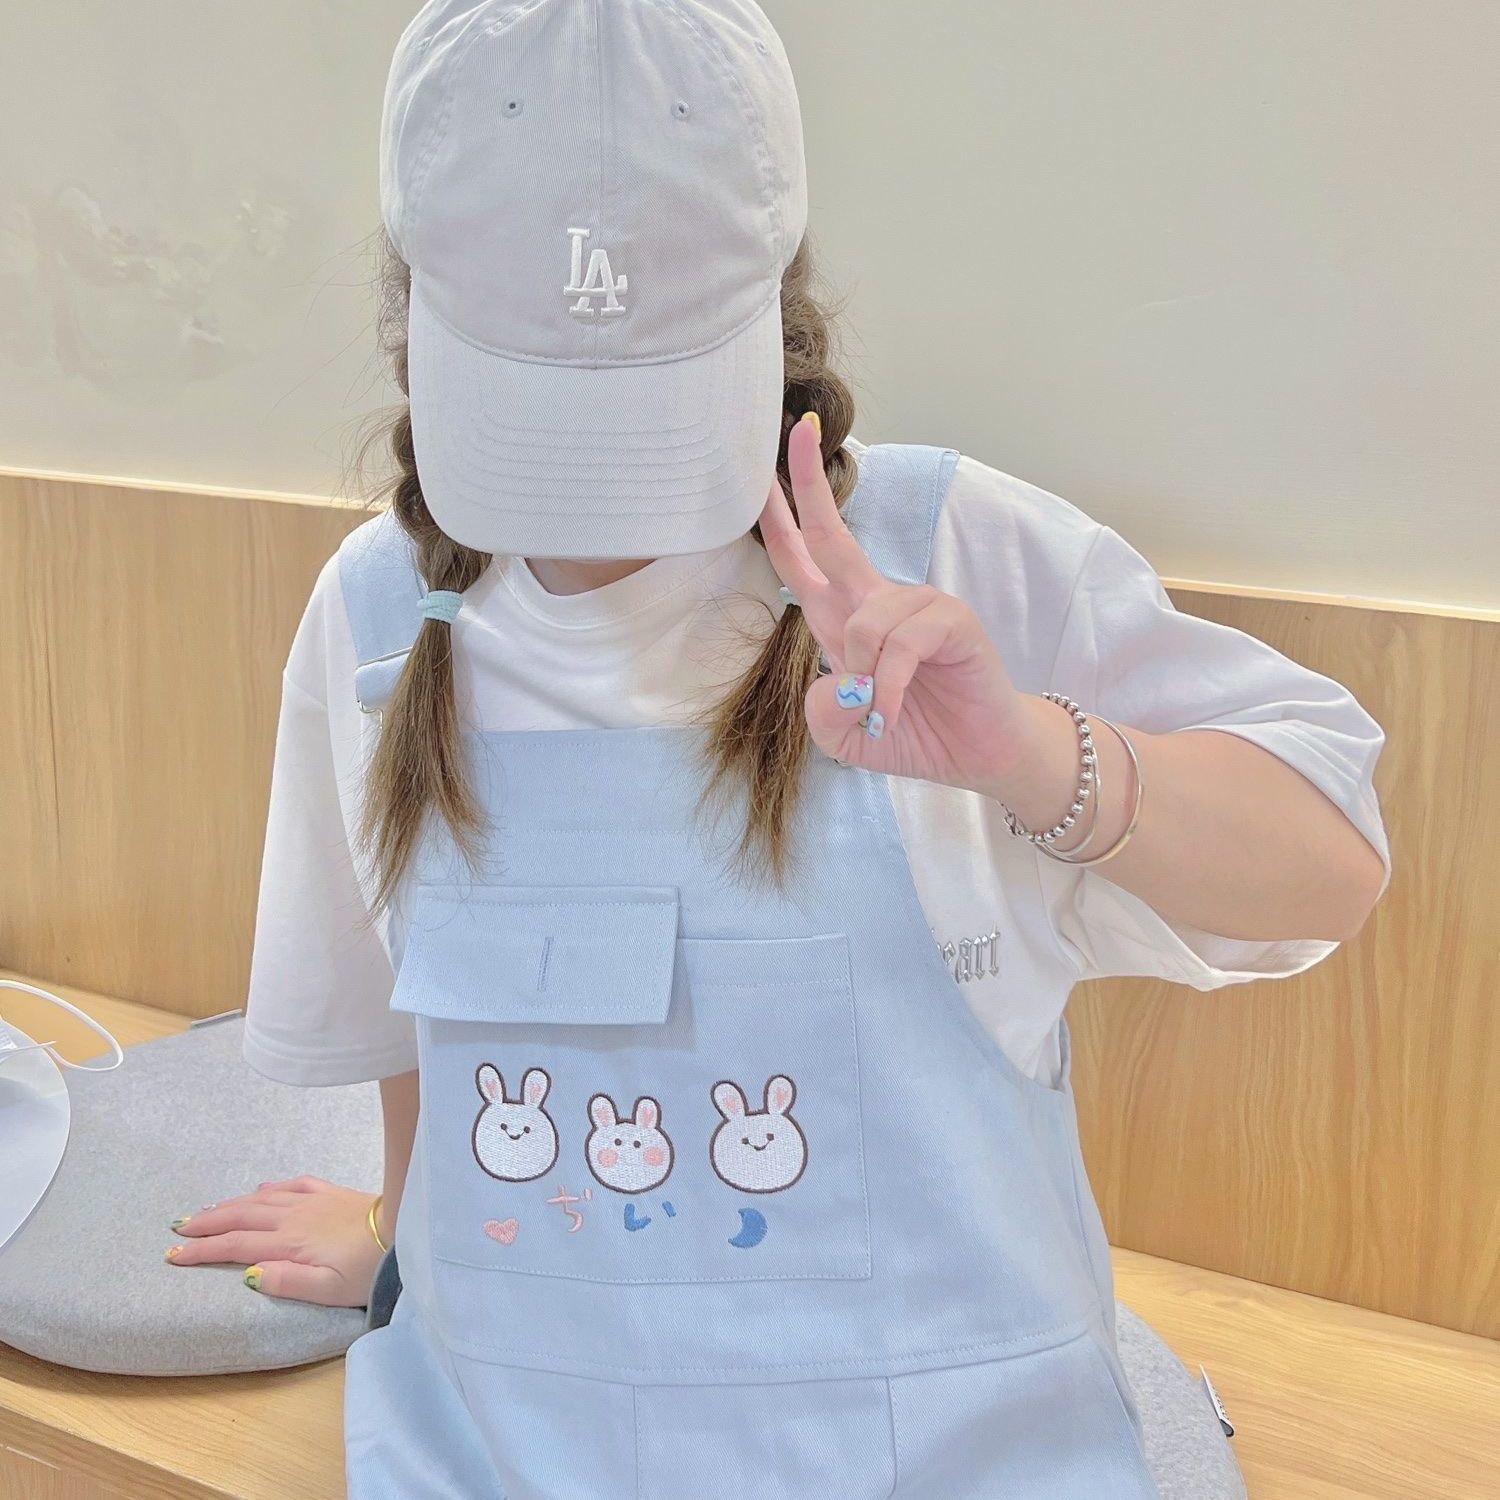 Best Han Japanese girl suit cute overalls shorts female summer student small fresh one-piece big boy wide-leg pants